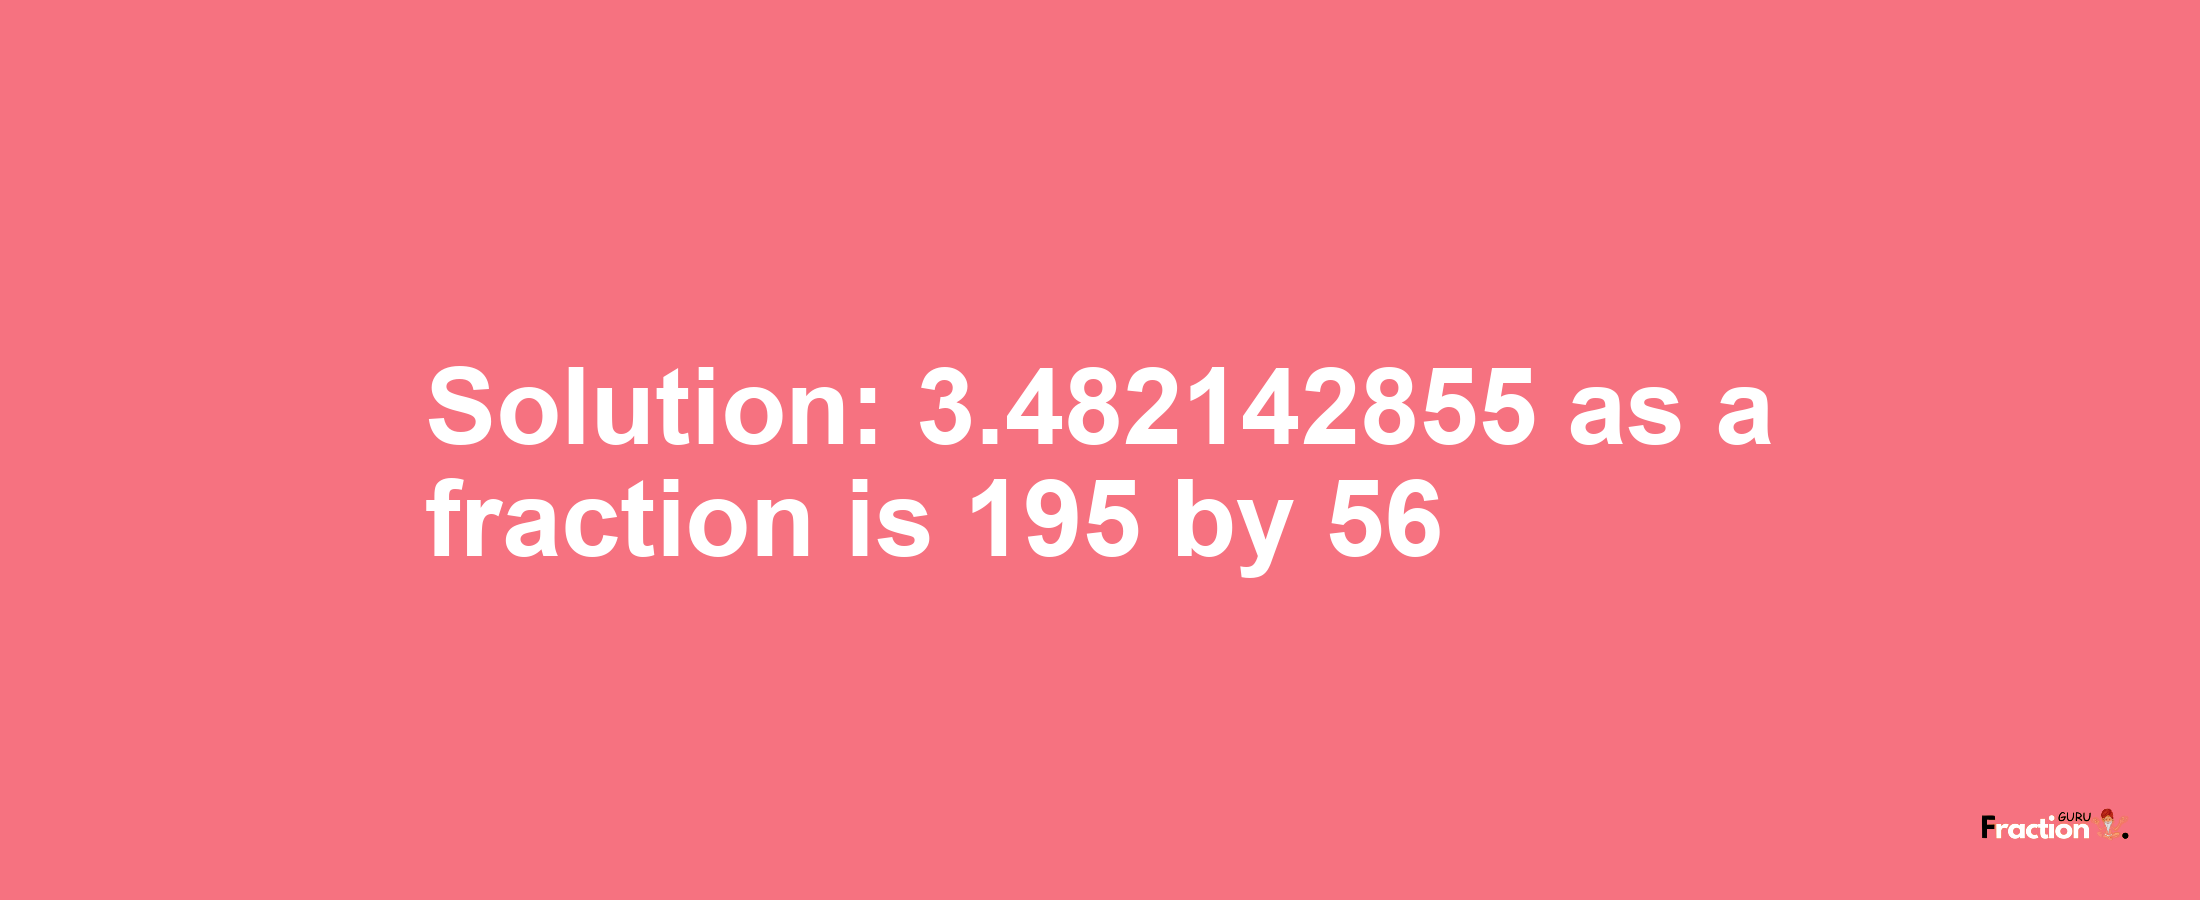 Solution:3.482142855 as a fraction is 195/56